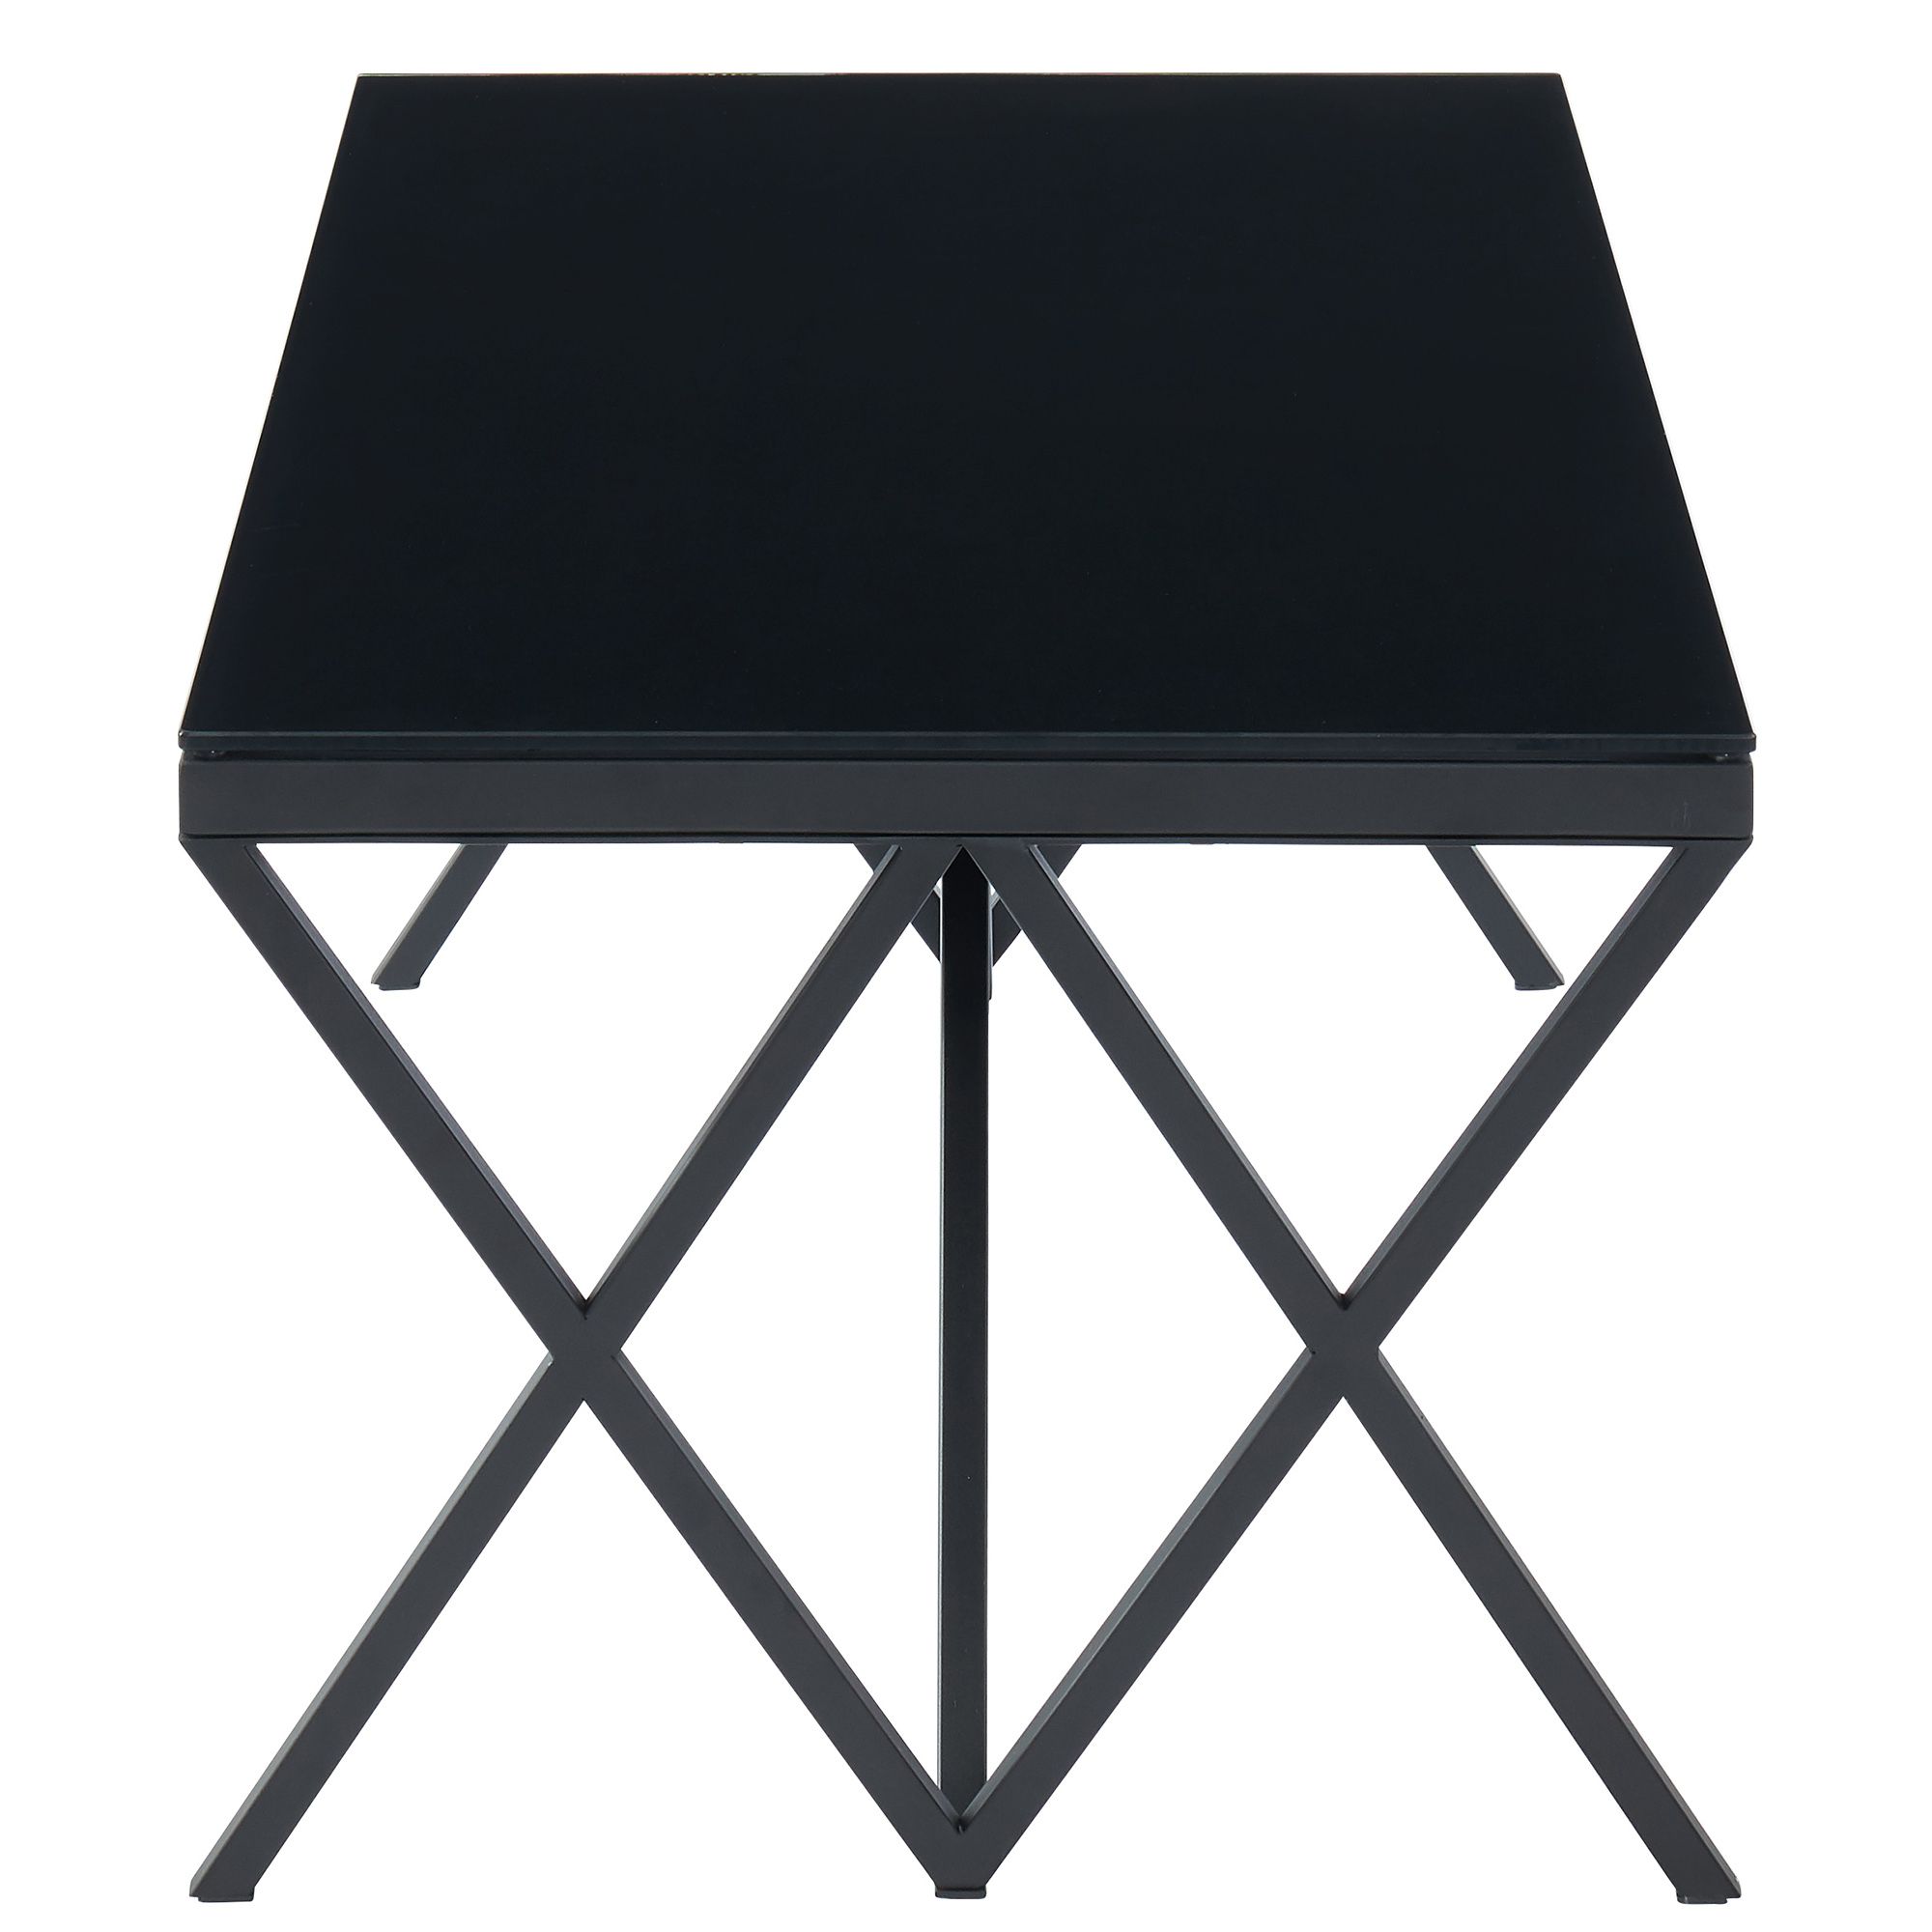 Calix Coffee Table In Black – Aux Merveilles With Regard To Addison&lane Calix Square Tables (View 17 of 20)